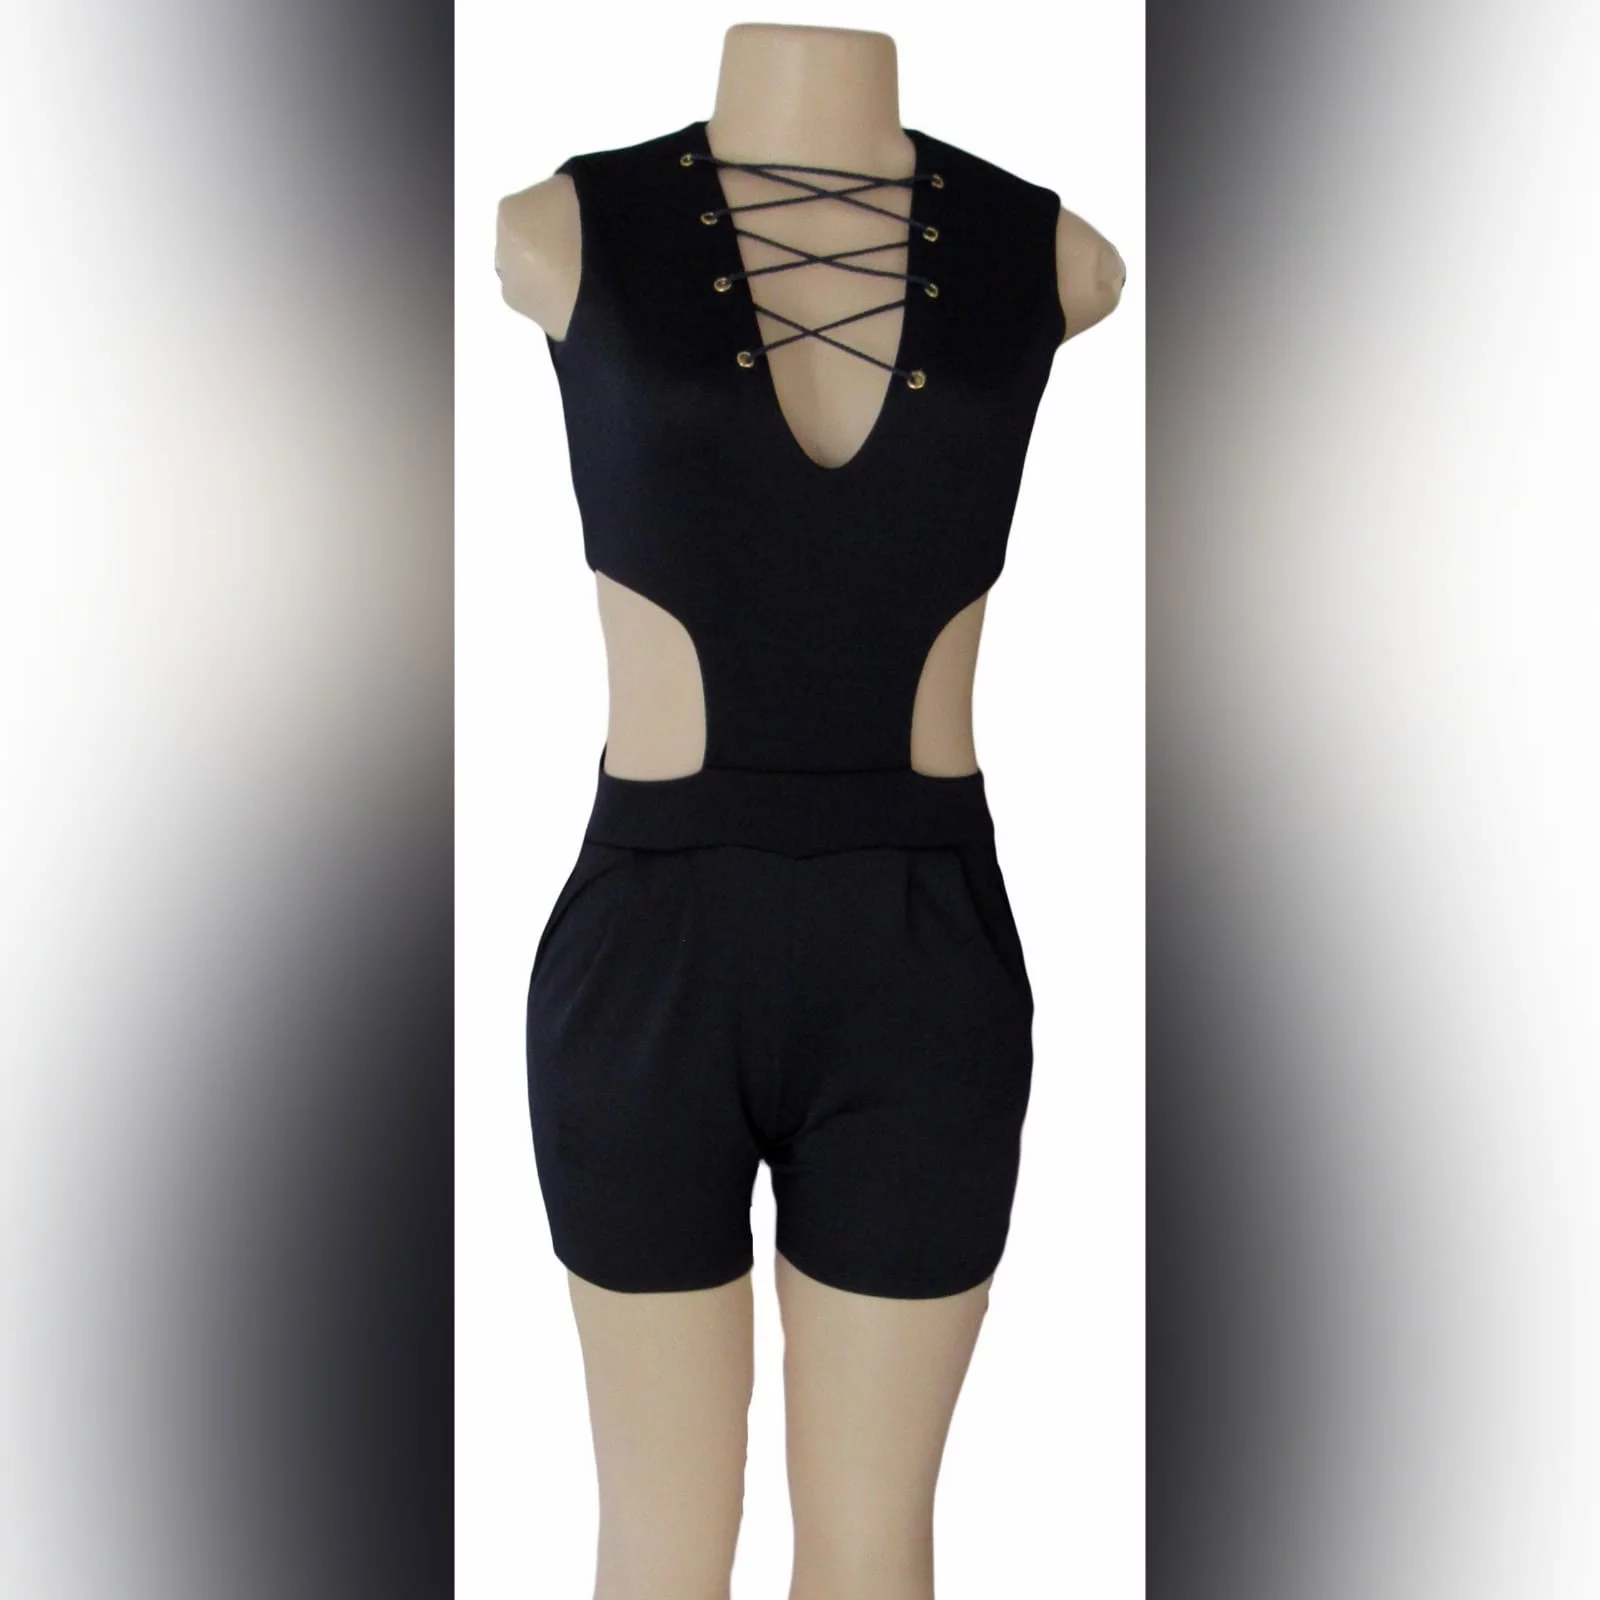 Navy blue smart casual bodysuit 5 navy blue smart casual bodysuit, with side tummy openings, v neckline detailed with lace-up detail, and back with a gold zipper.